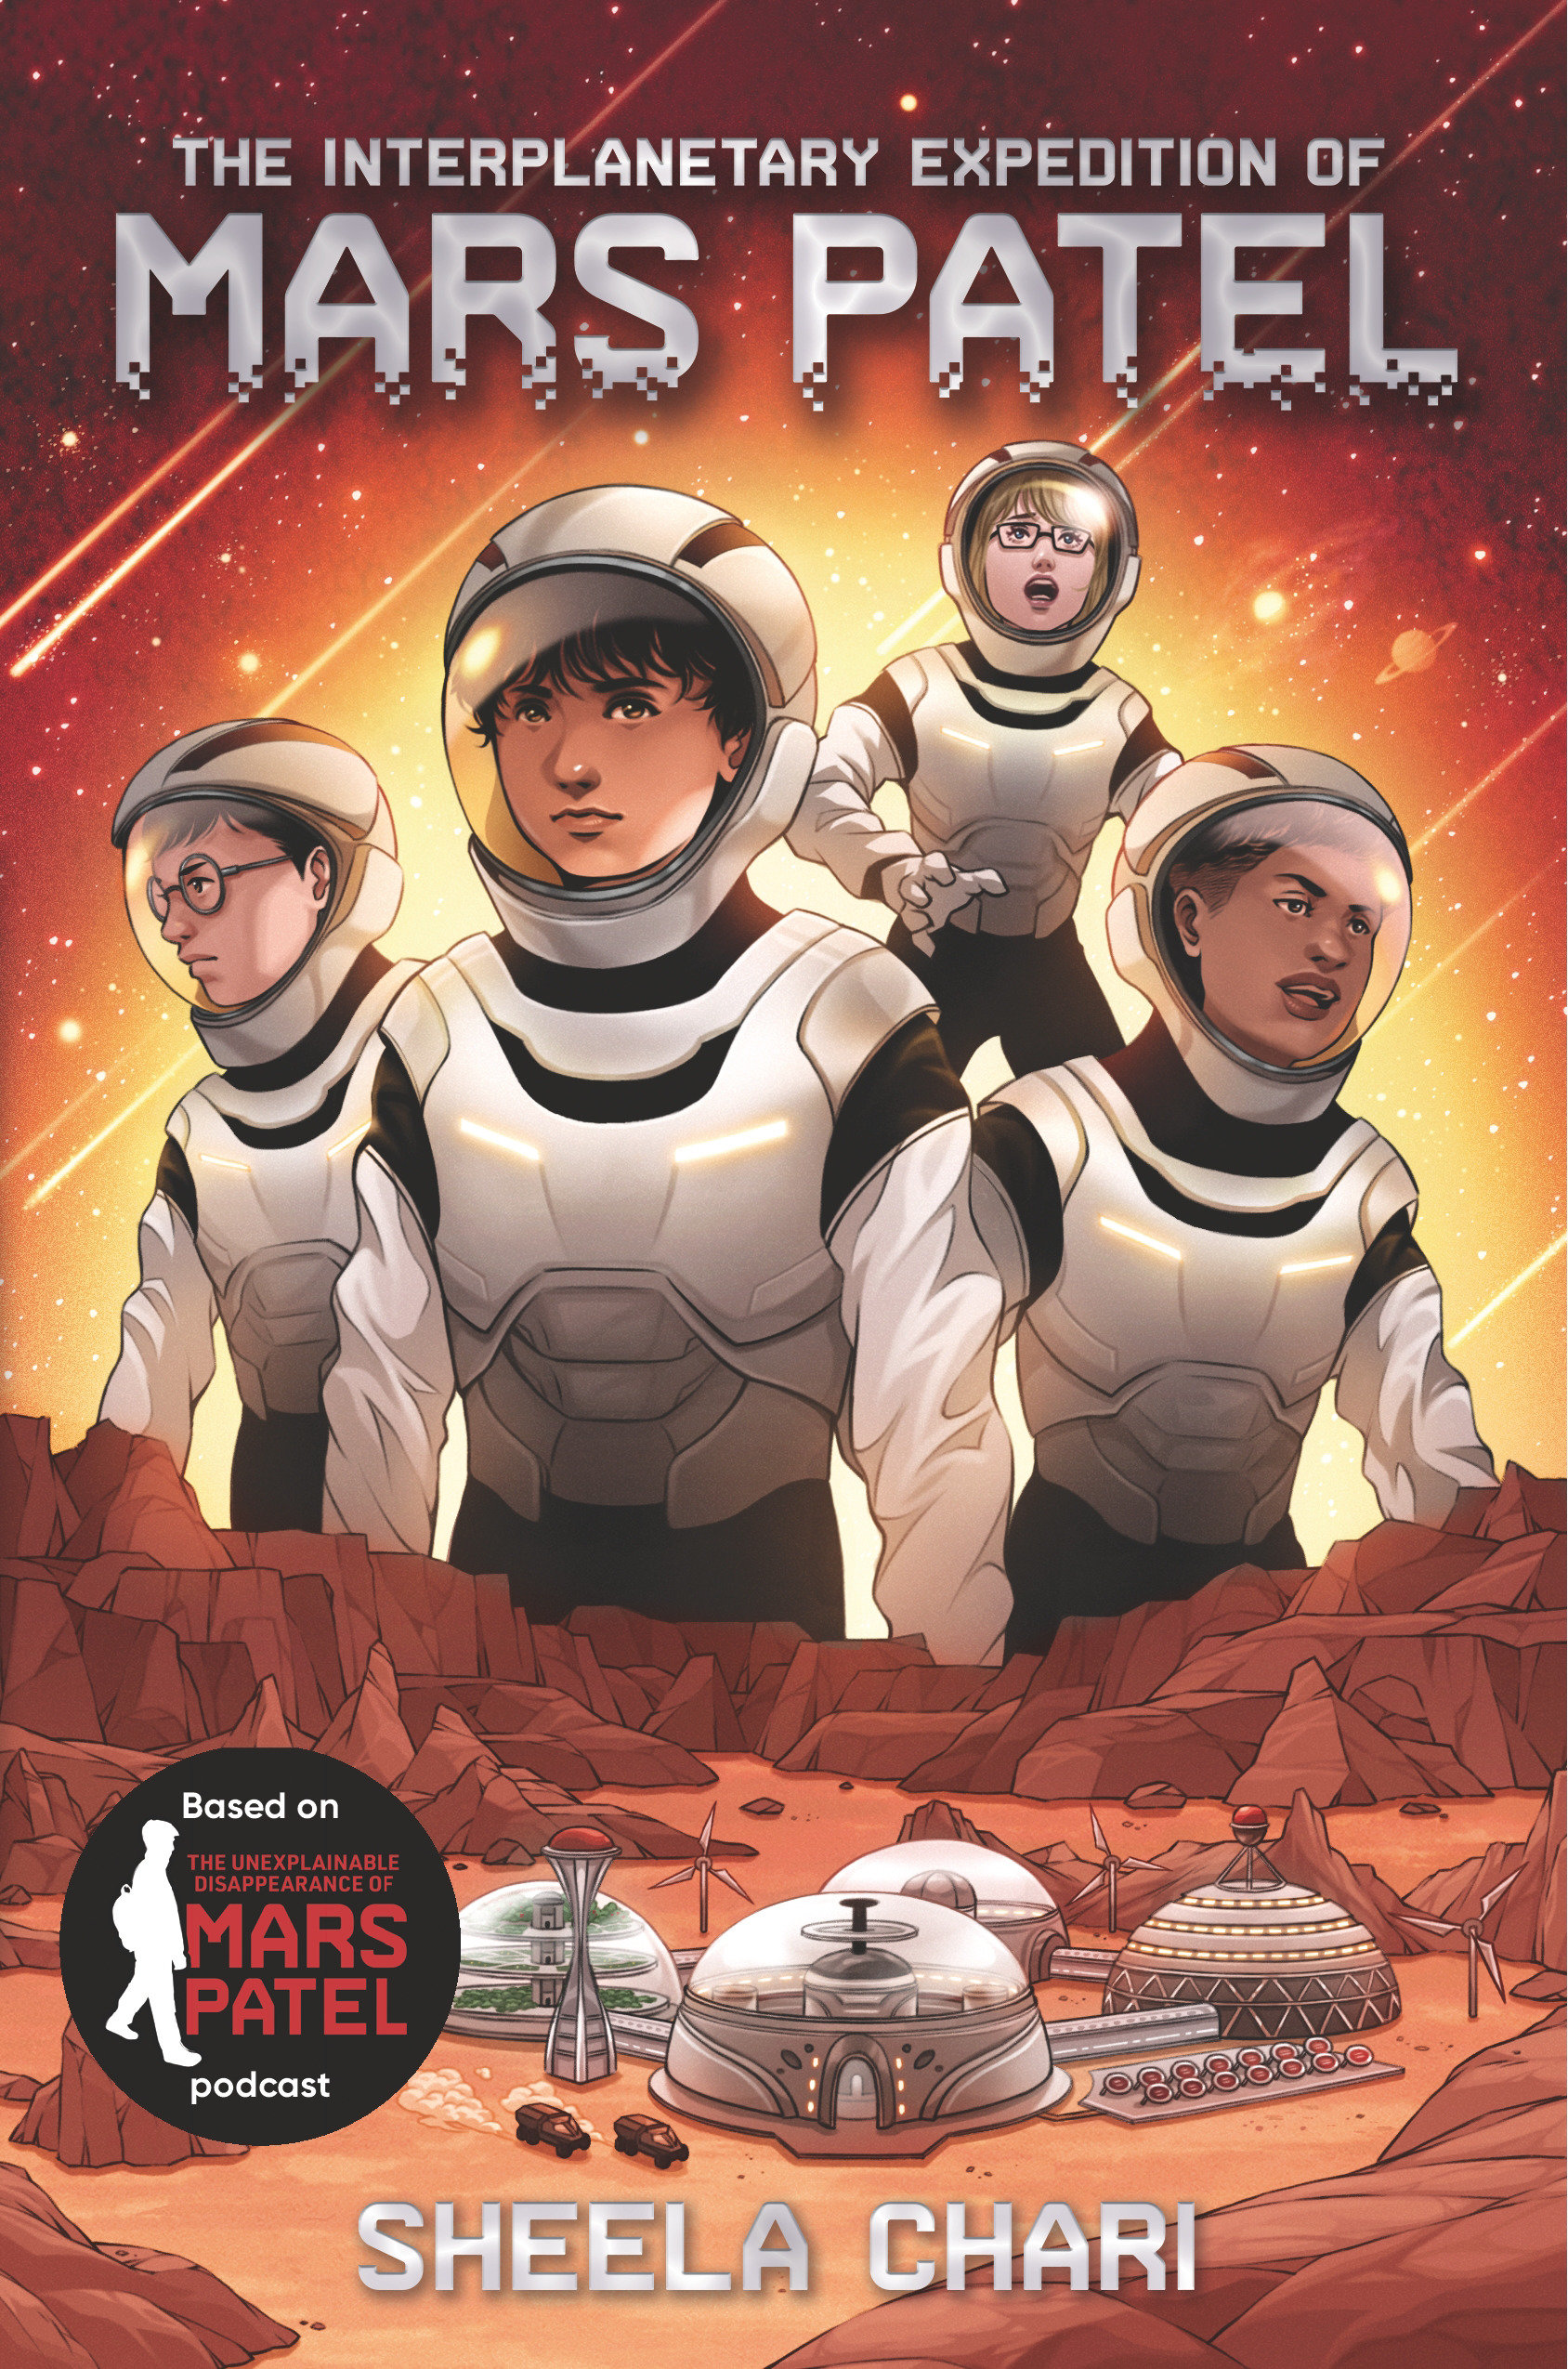 The Interplanetary Expedition Of Mars Patel (Hardcover Book)